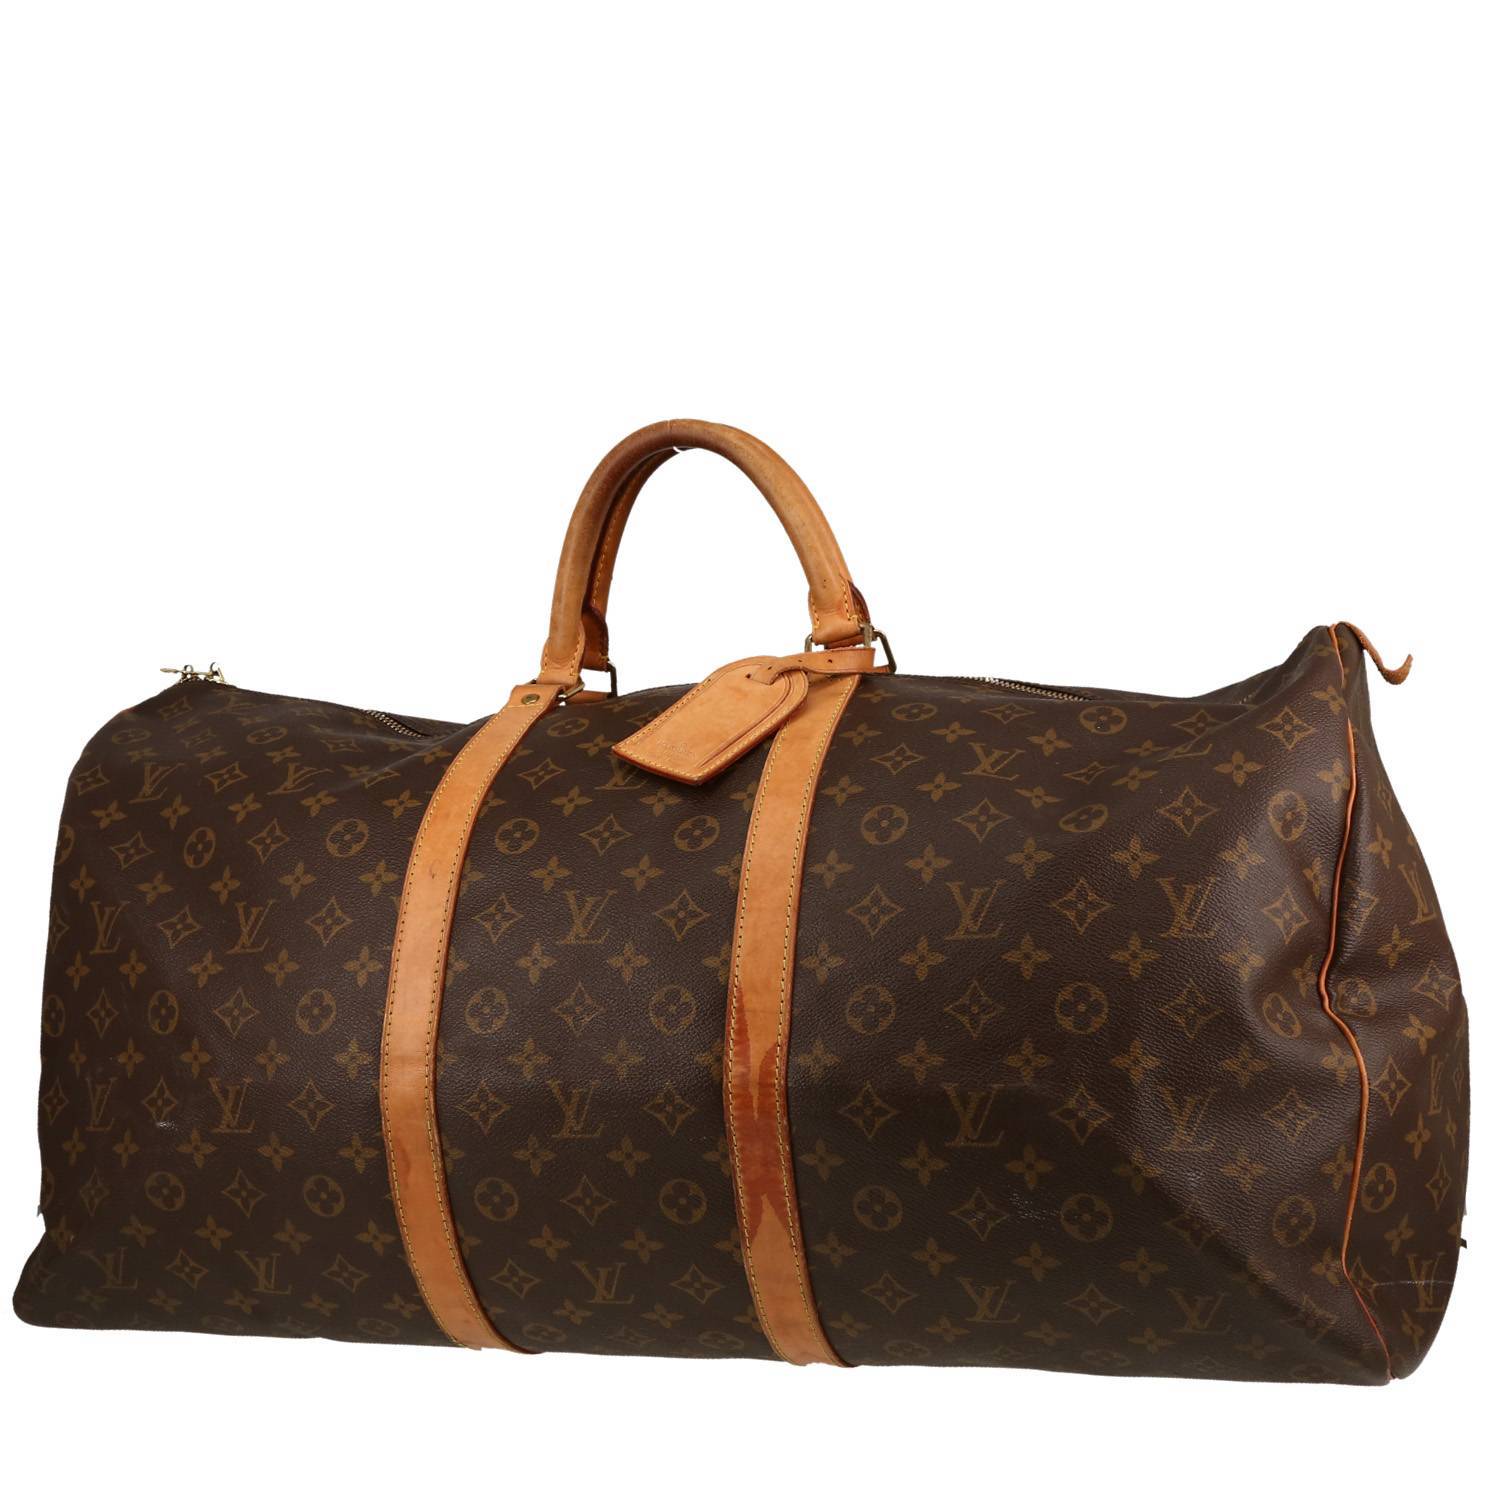 Louis Vuitton Keepall 60 cm travel bag in brown monogram canvas and natural leather - 00pp